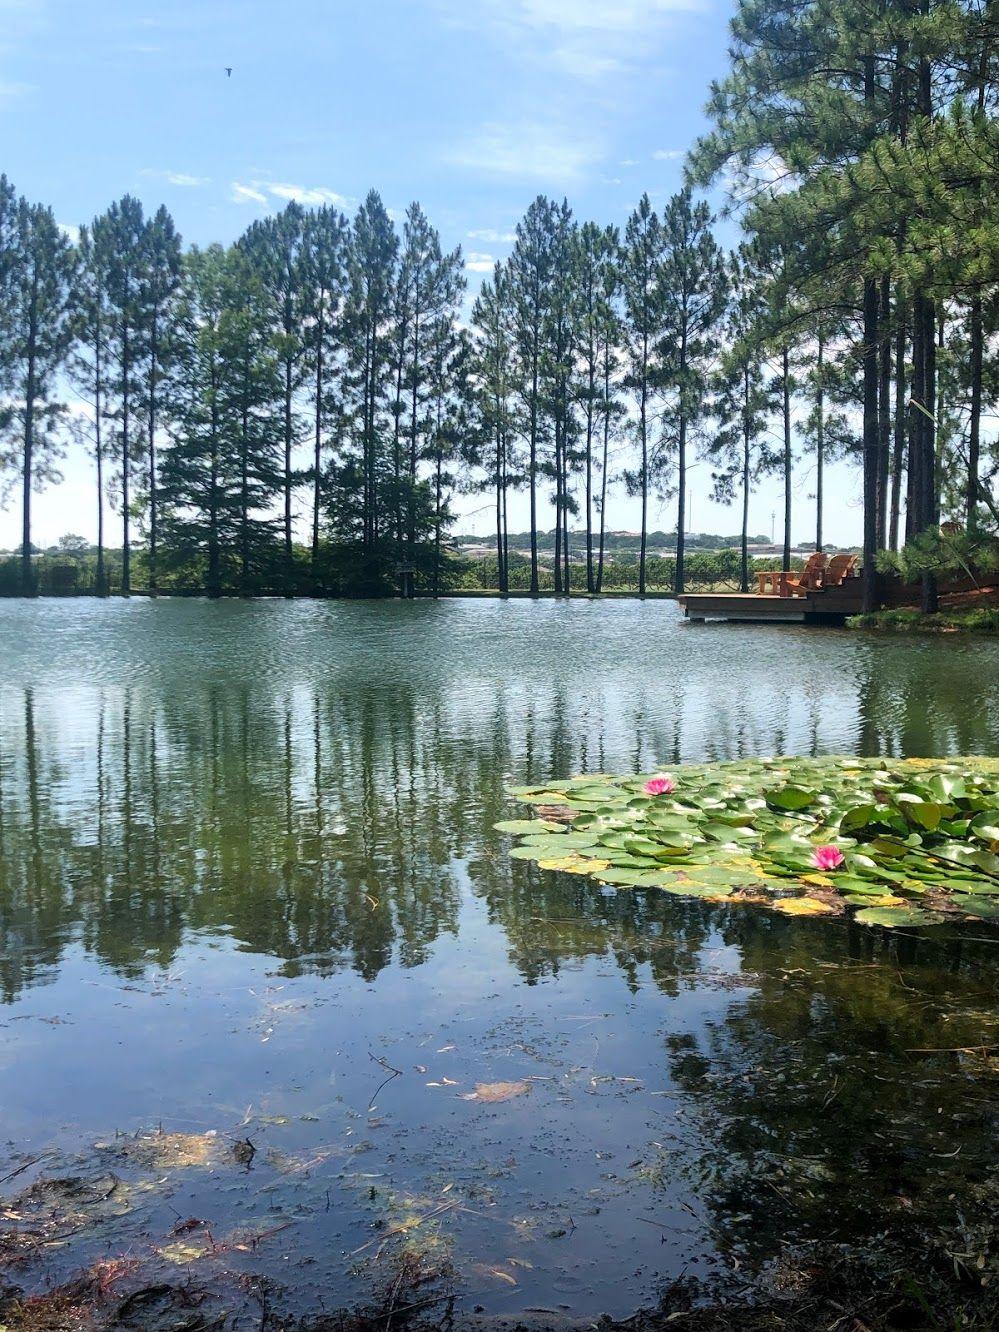 A pond with lily pads and tall, thin trees in the background.